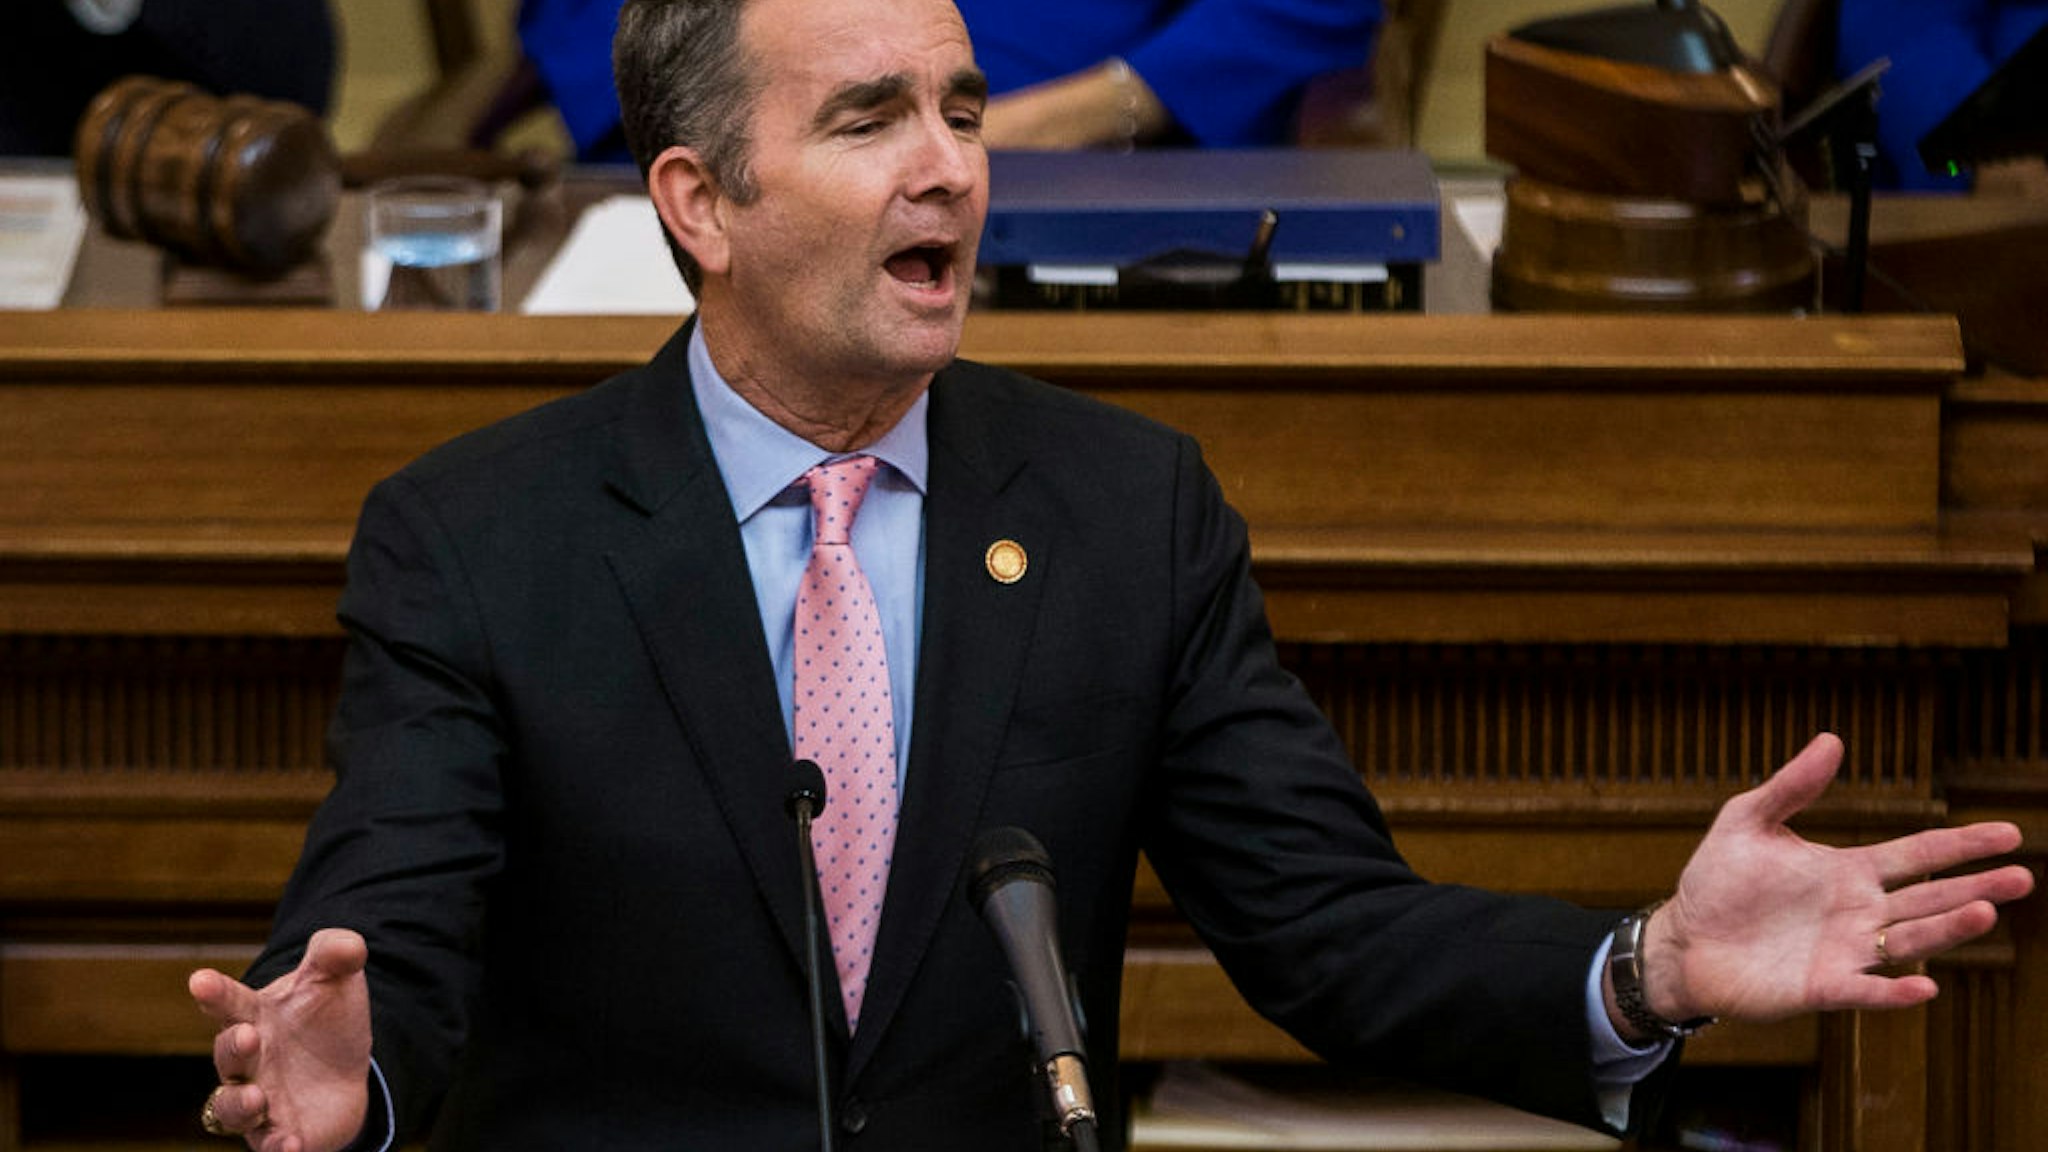 Gov. Ralph Northam delivers the State of the Commonwealth address at the Virginia State Capitol on January 8, 2020 in Richmond, Virginia.